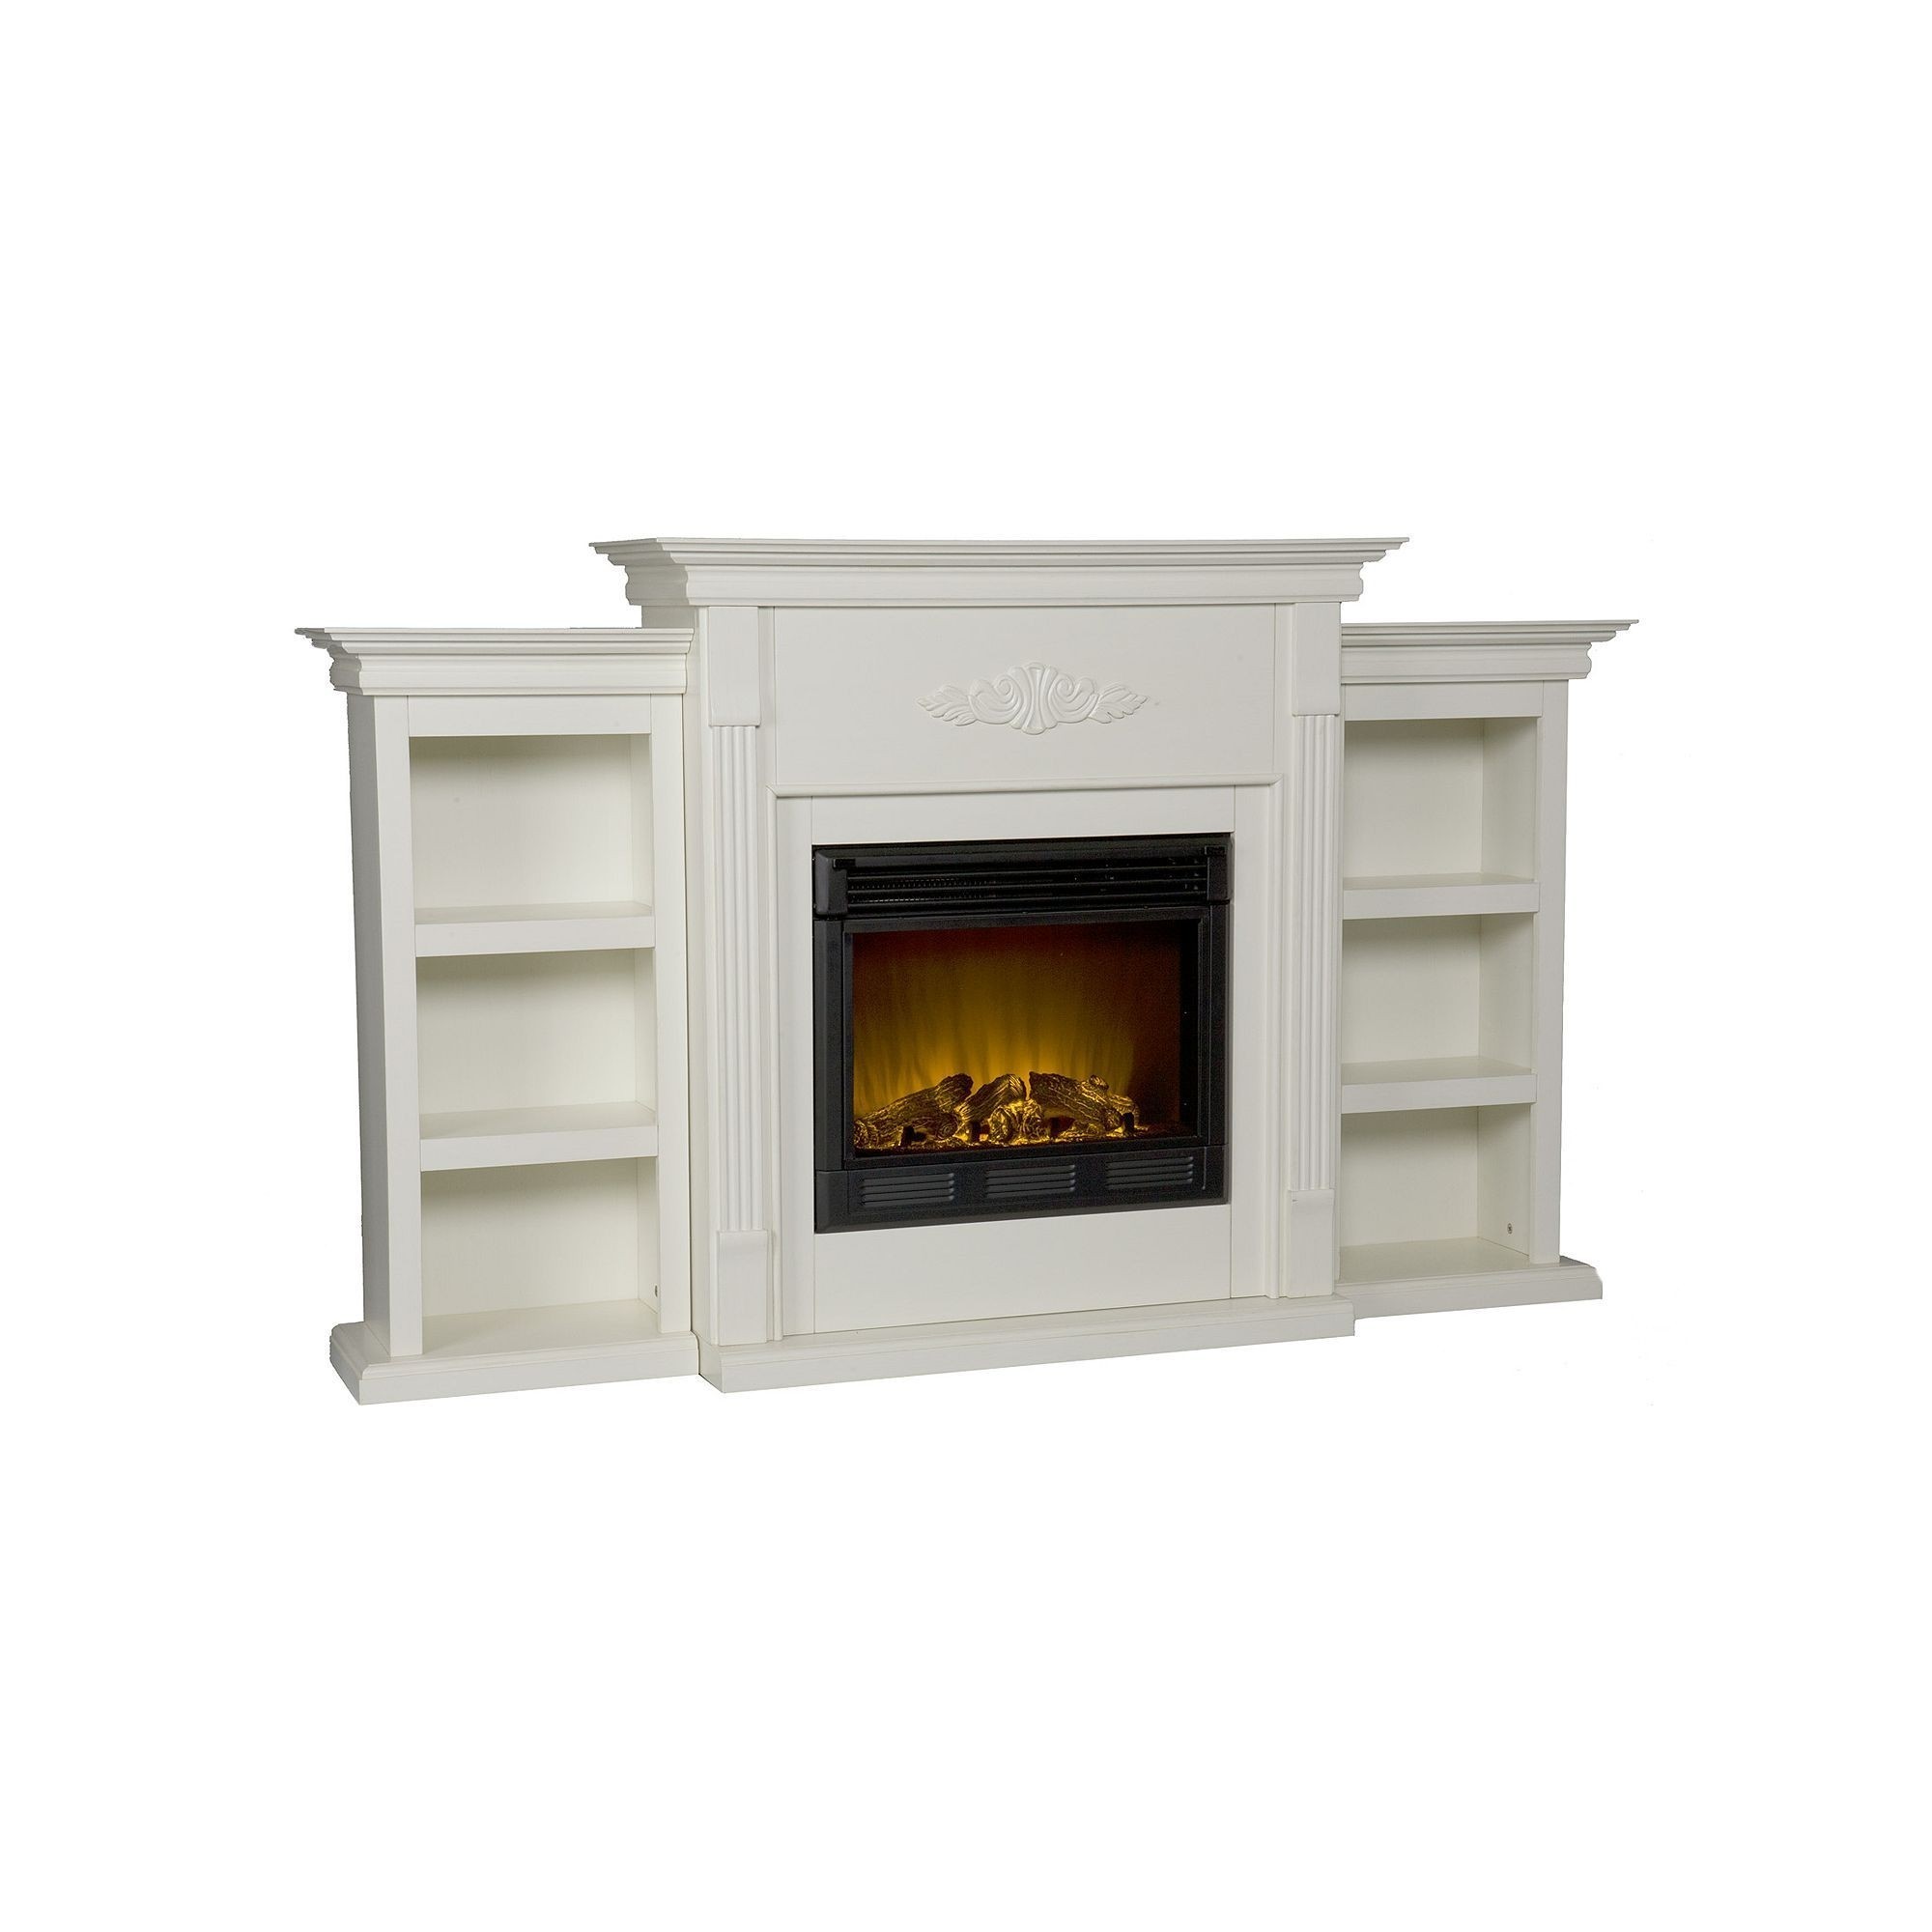 Fireplace cabinets and bookcases